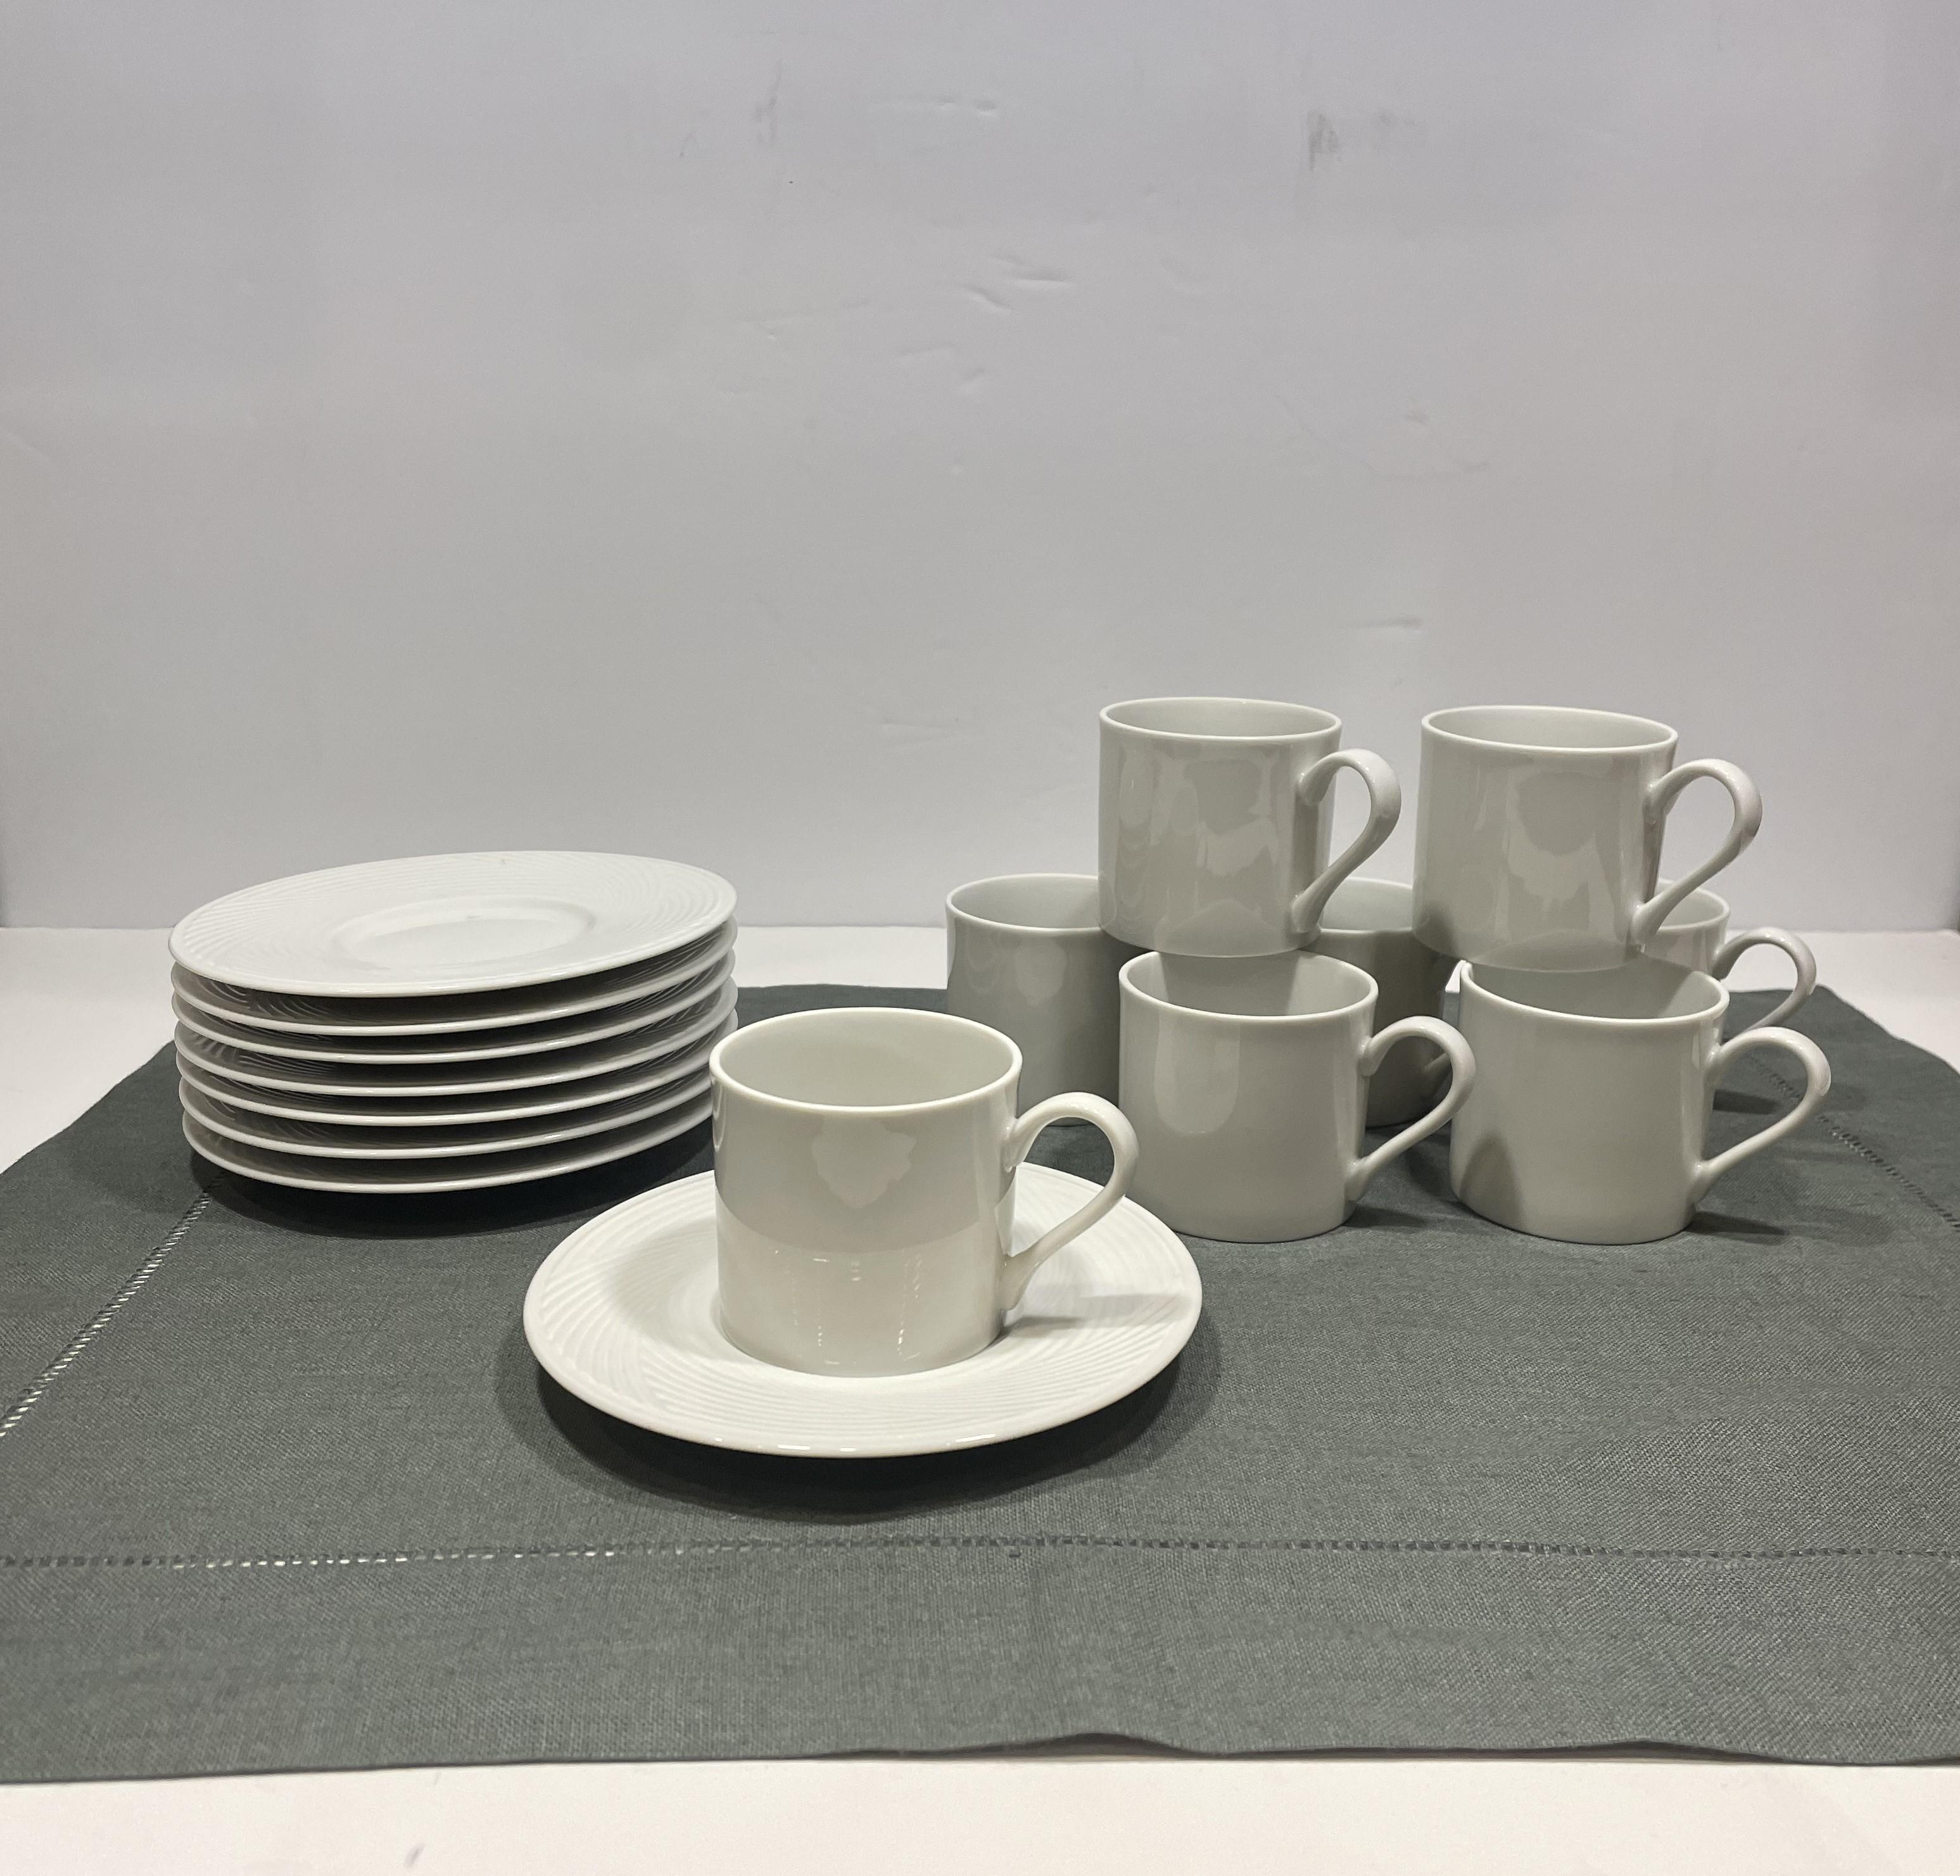 20th Century 1960s White Porcelain Dansk Demitasse Cups and Saucers - Set of 8 For Sale